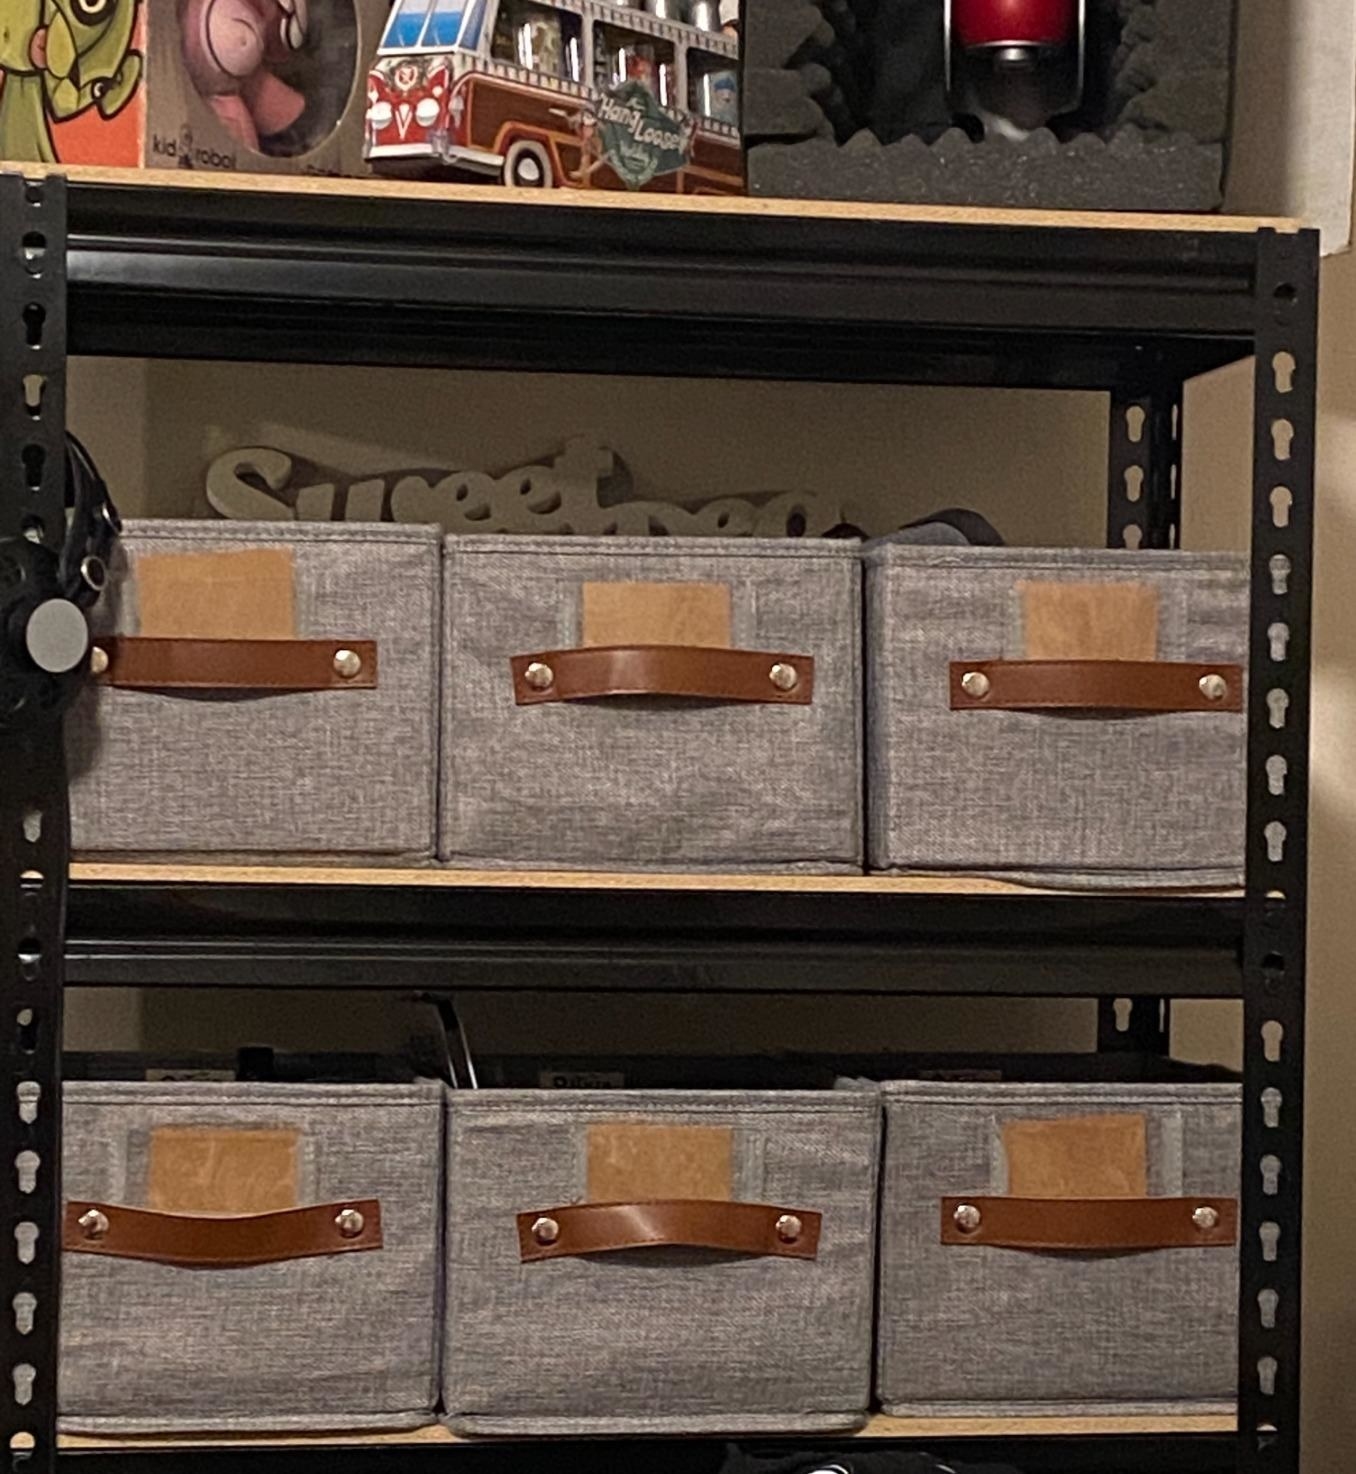 A reviewer showing six cube-shaped tote baskets on their shelves